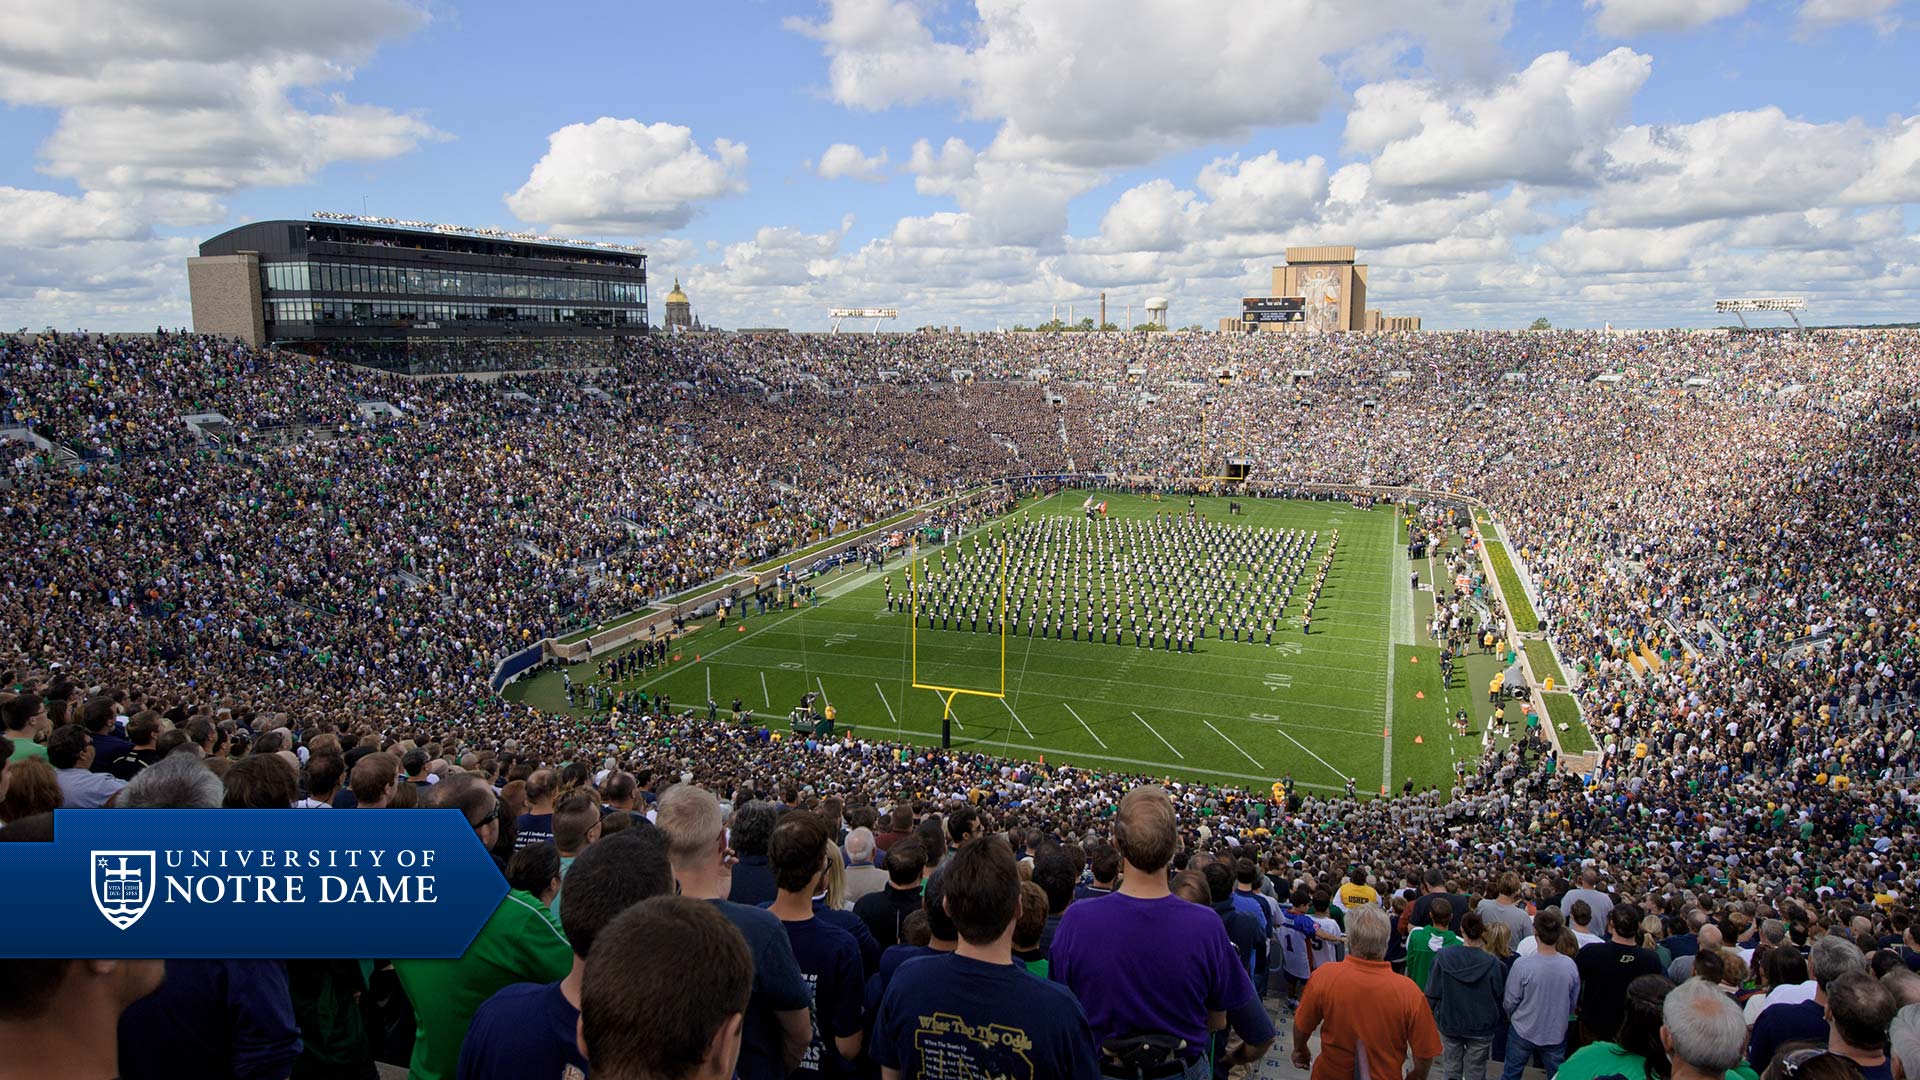 Sights and Sounds / / Visitors / / University of Notre Dame